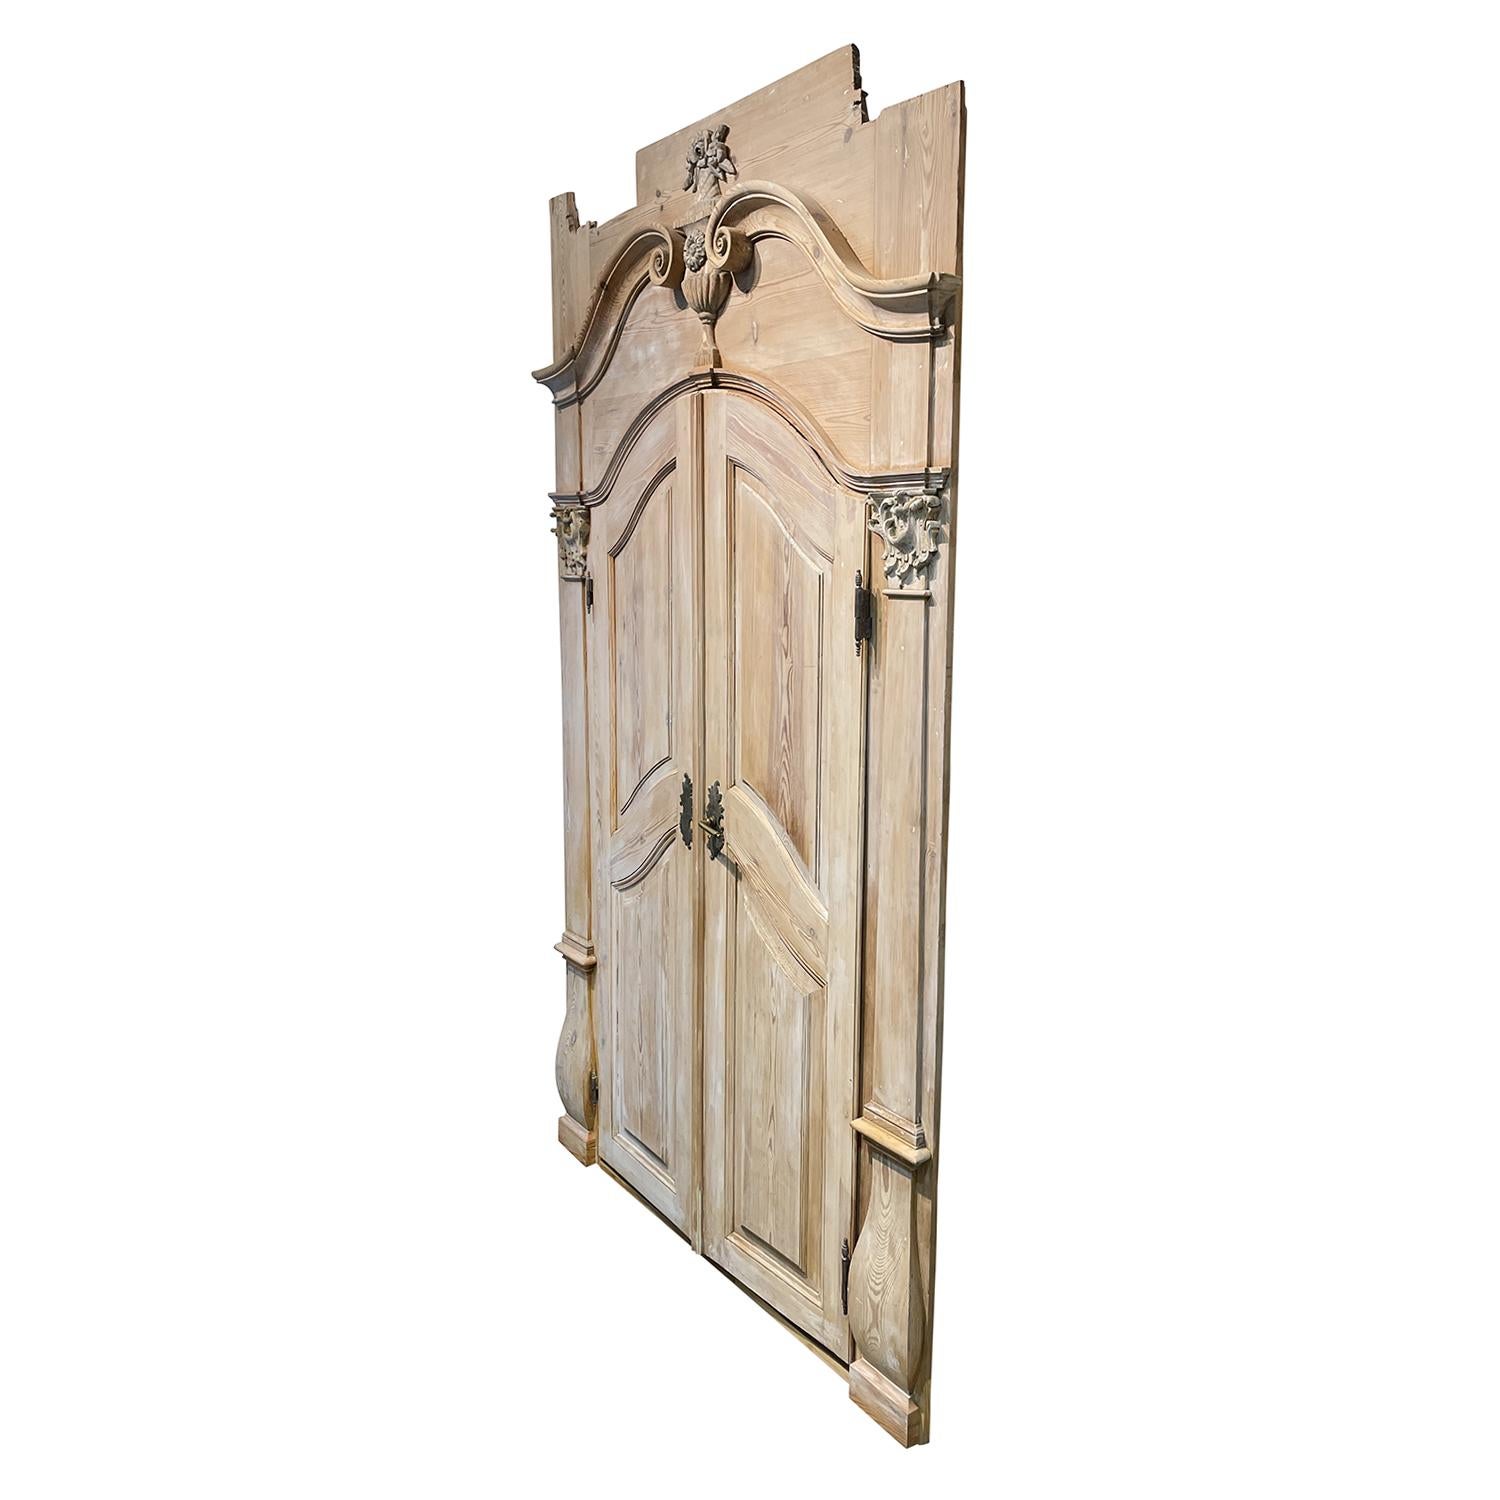 An antique Austrian Baroque entrance door made of hand crafted Pinewood, in good condition. The restored double-door from Salzburg is consisting its original hardware and key. Minor fading, scratches due to age. Wear consistent with age and use.